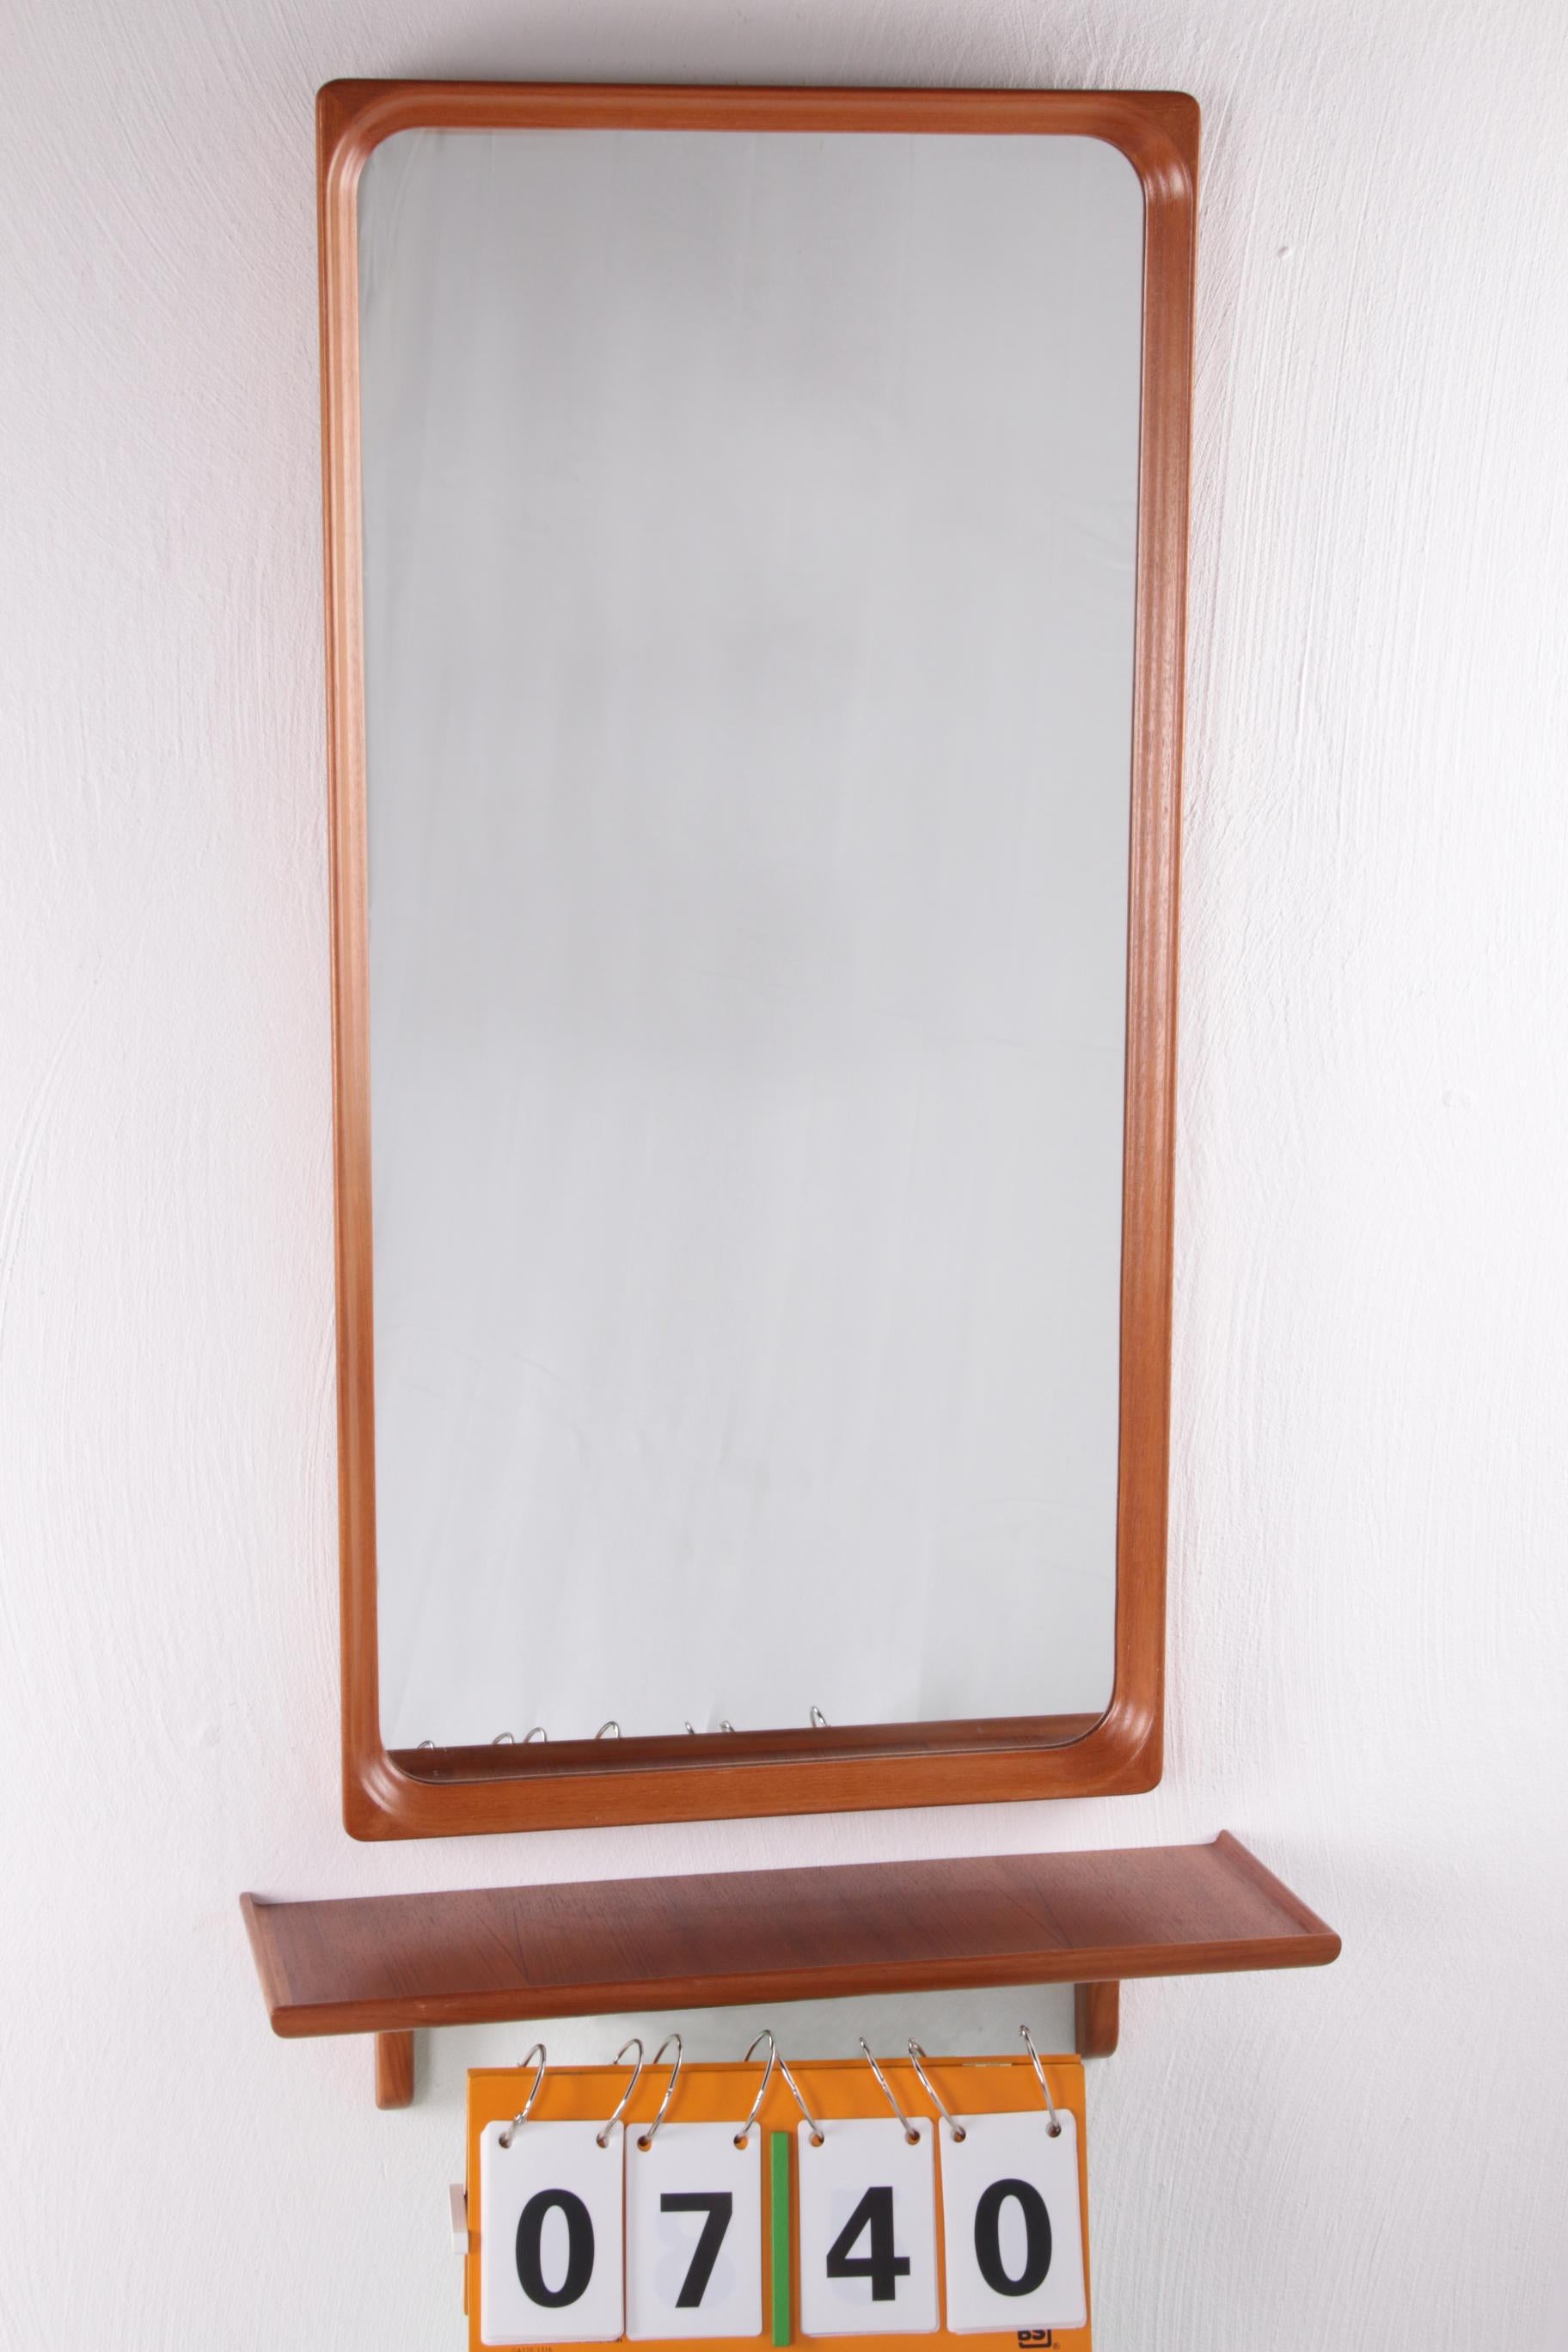 A beautiful rectangular wall mirror from Markaryd Glas Master, from Denmark.

In excellent condition and marked.

Made of teak with a teak shelf for your accessories.

Looks great in the hall or bedroom.
Shelf:

Height 13 cm

Length 55